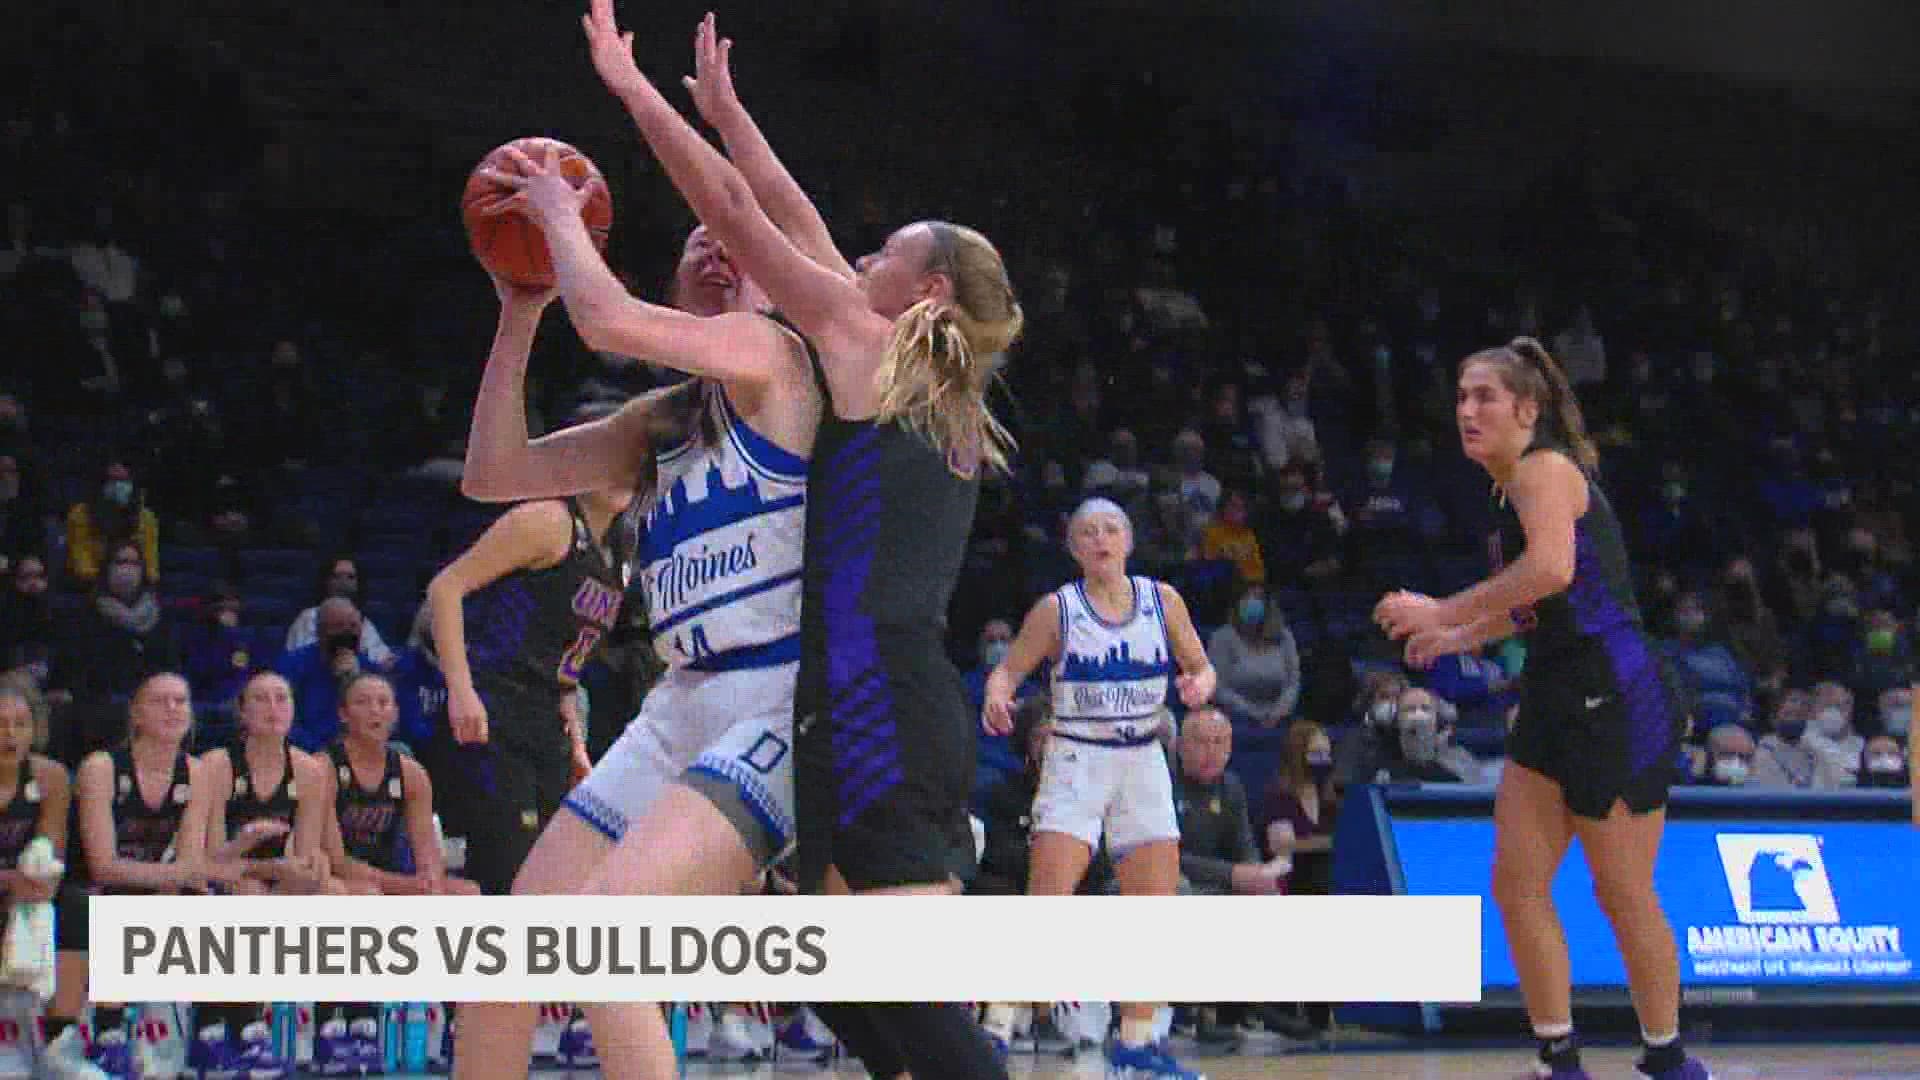 The Bulldogs ended their losing streak and moved to 10-8 overall.